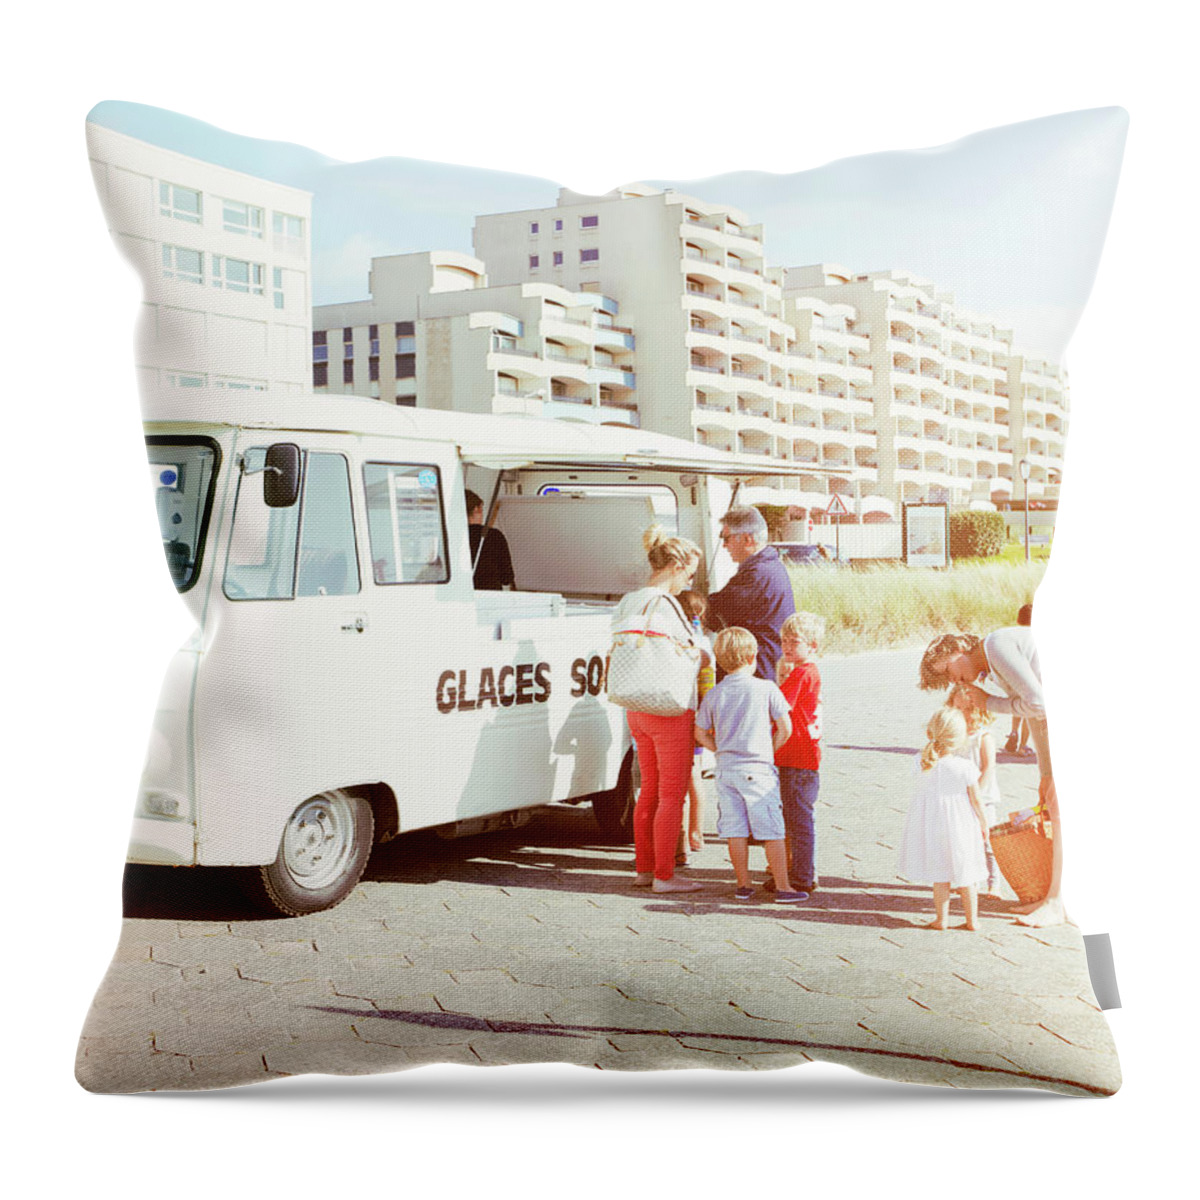 Shadow Throw Pillow featuring the photograph Raymonds Glaces by Mark Leary